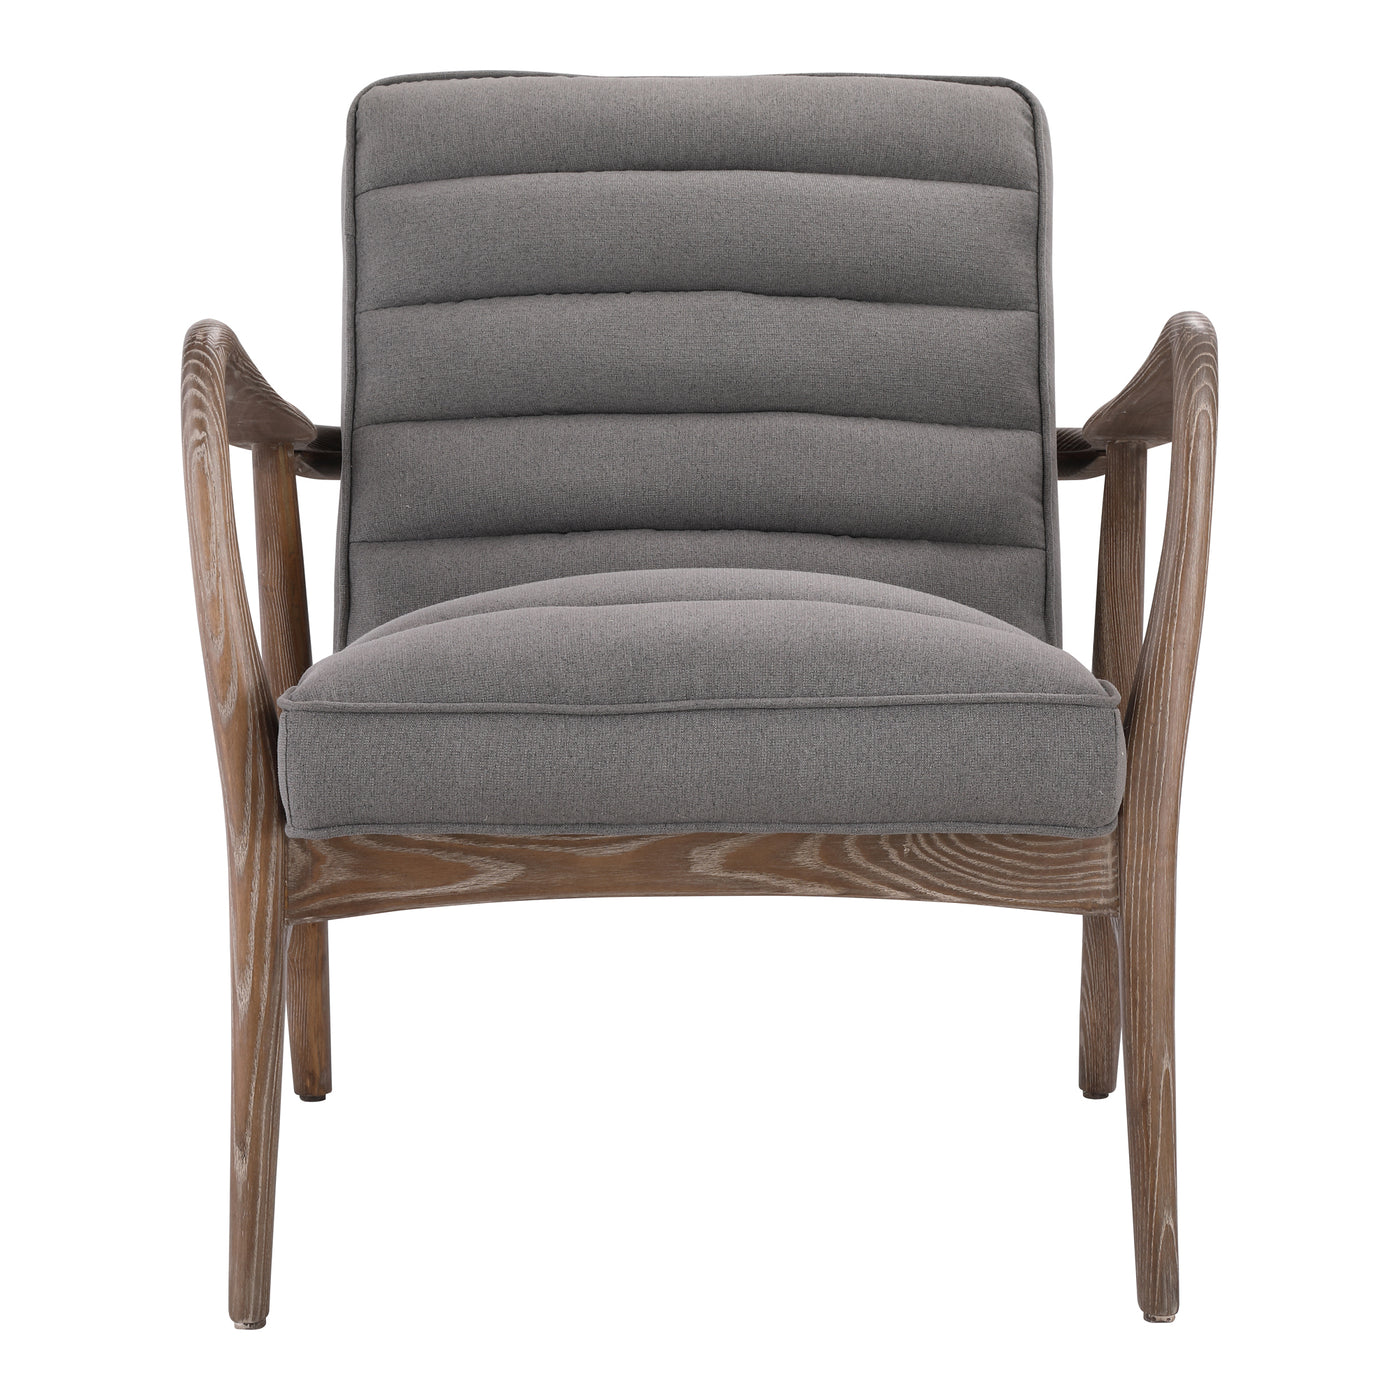 Sit down and take a load off with the Anderson Arm Chair. Its rolled, tufted seating and slim side arms make it the perfec...